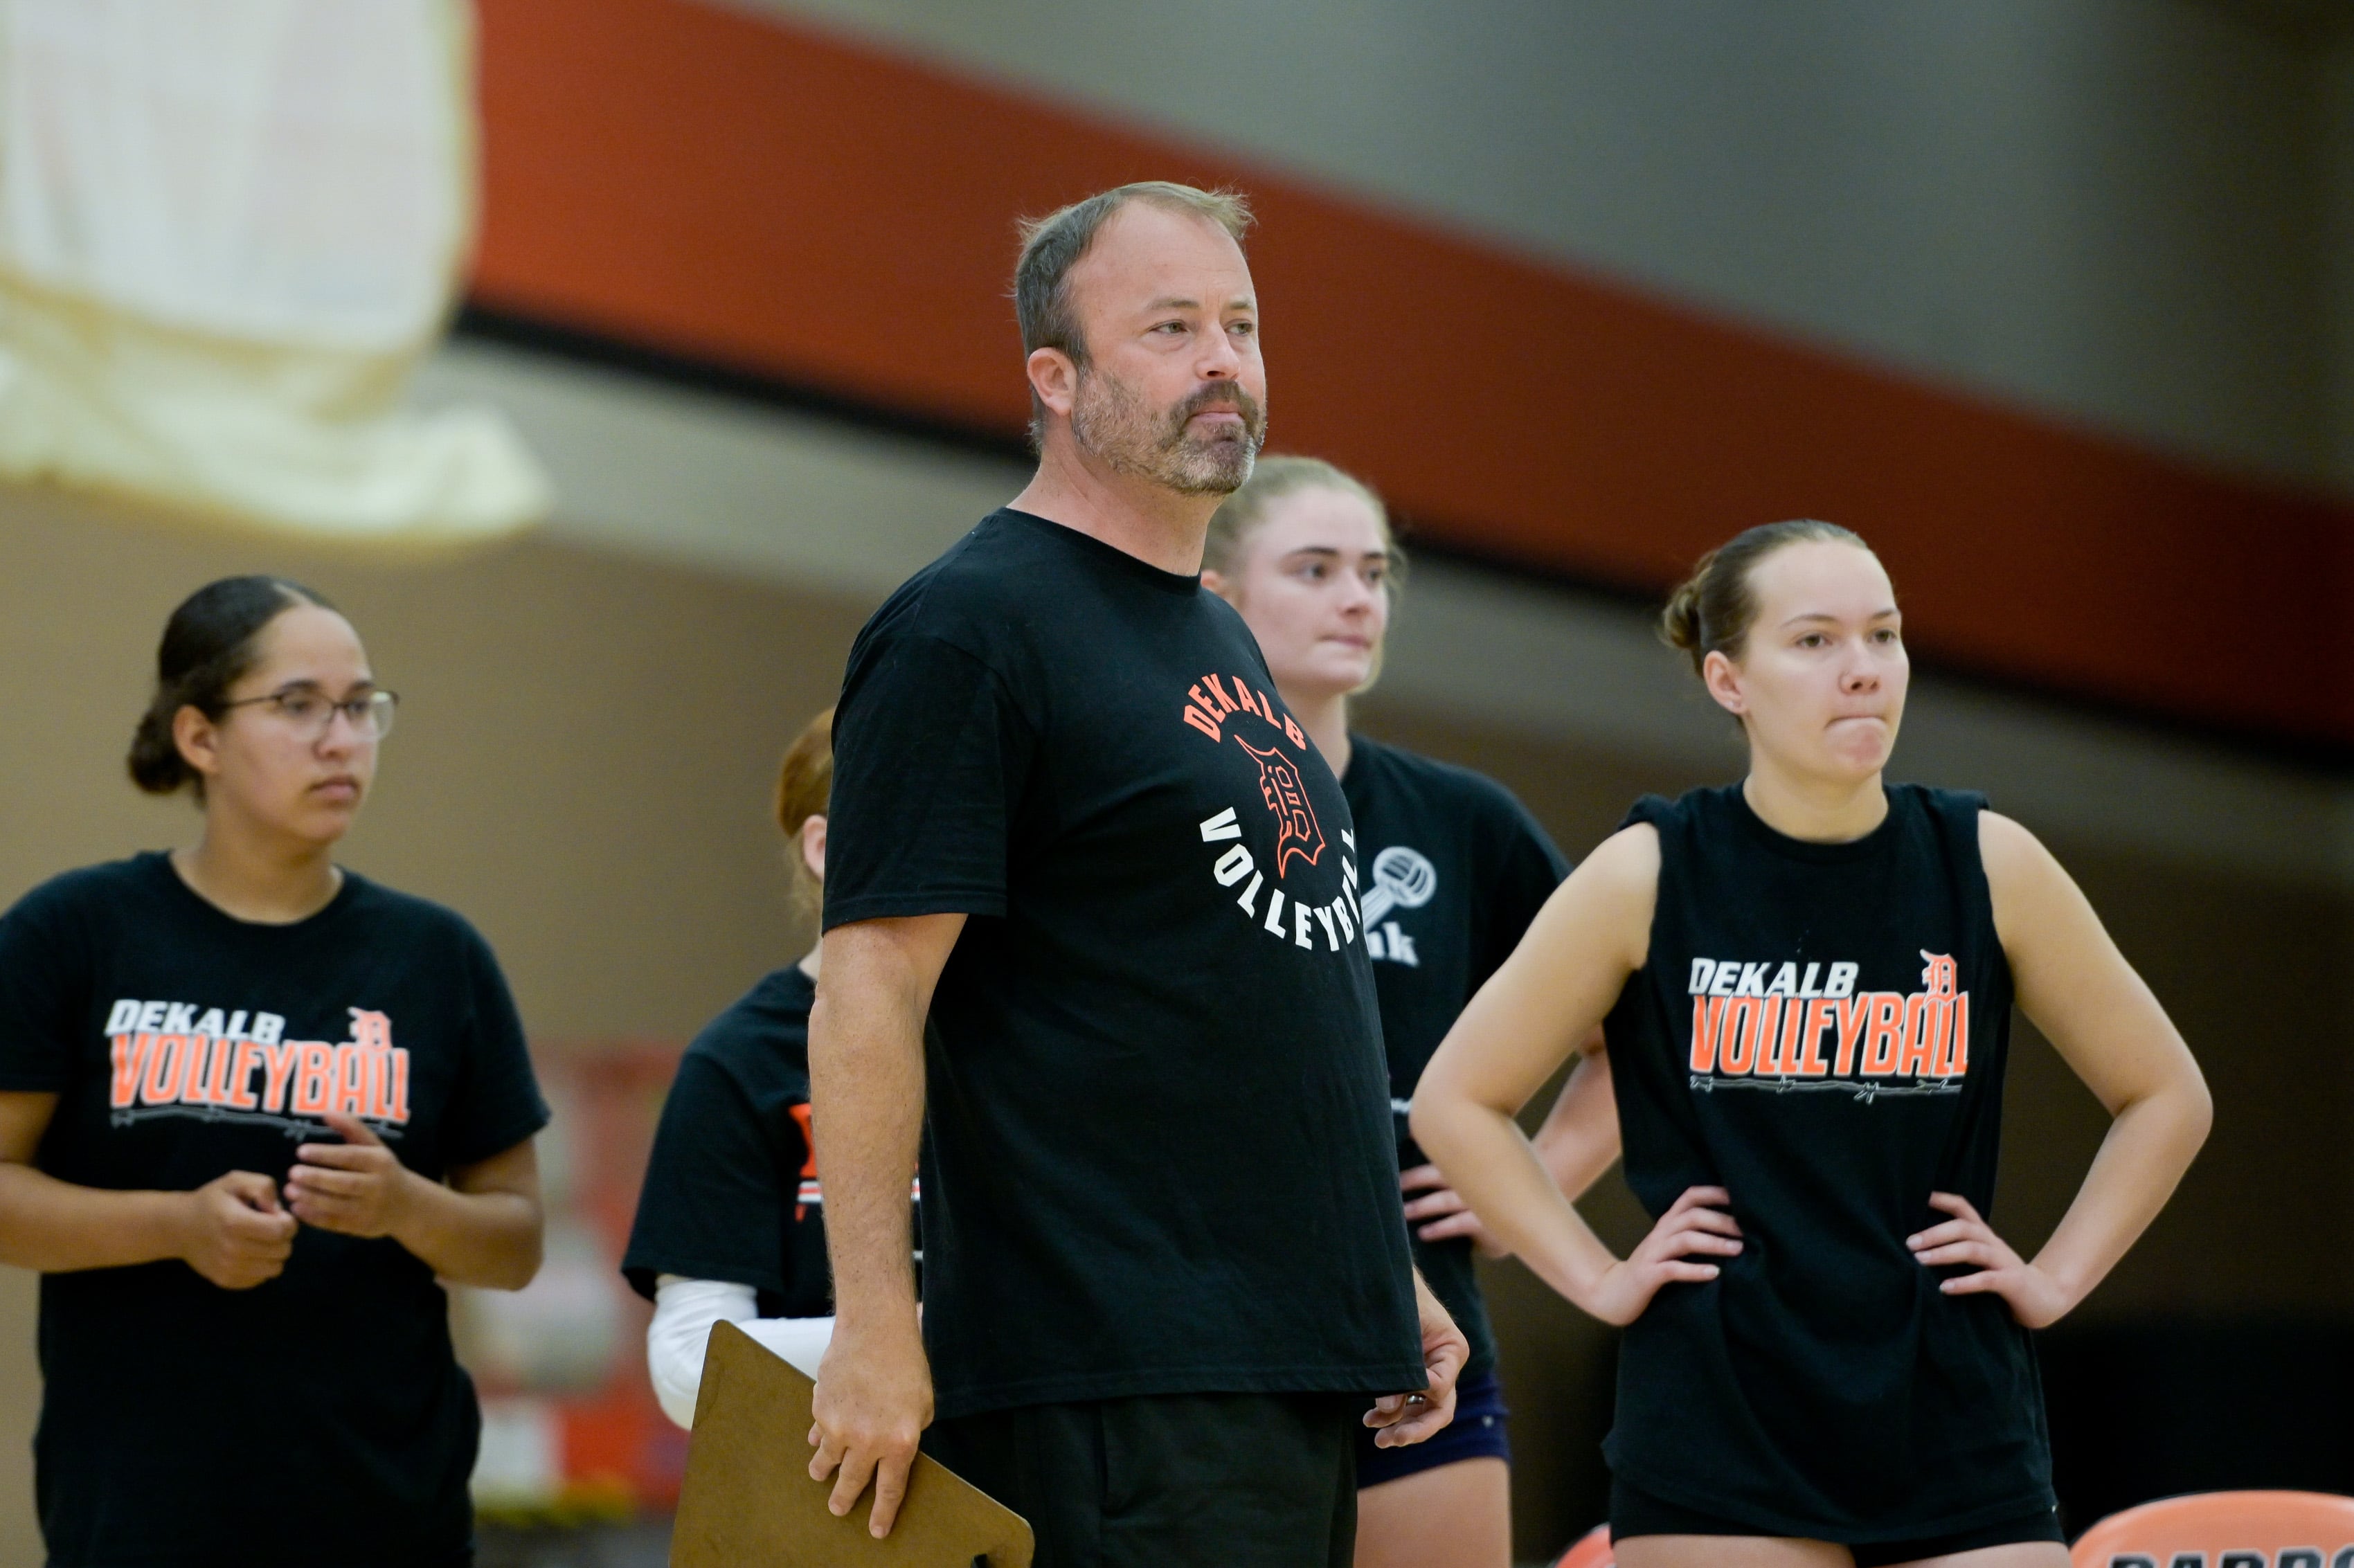 Girls volleyball: ‘Underdog’ DeKalb wrapping up productive summer under new coach Keith Foster